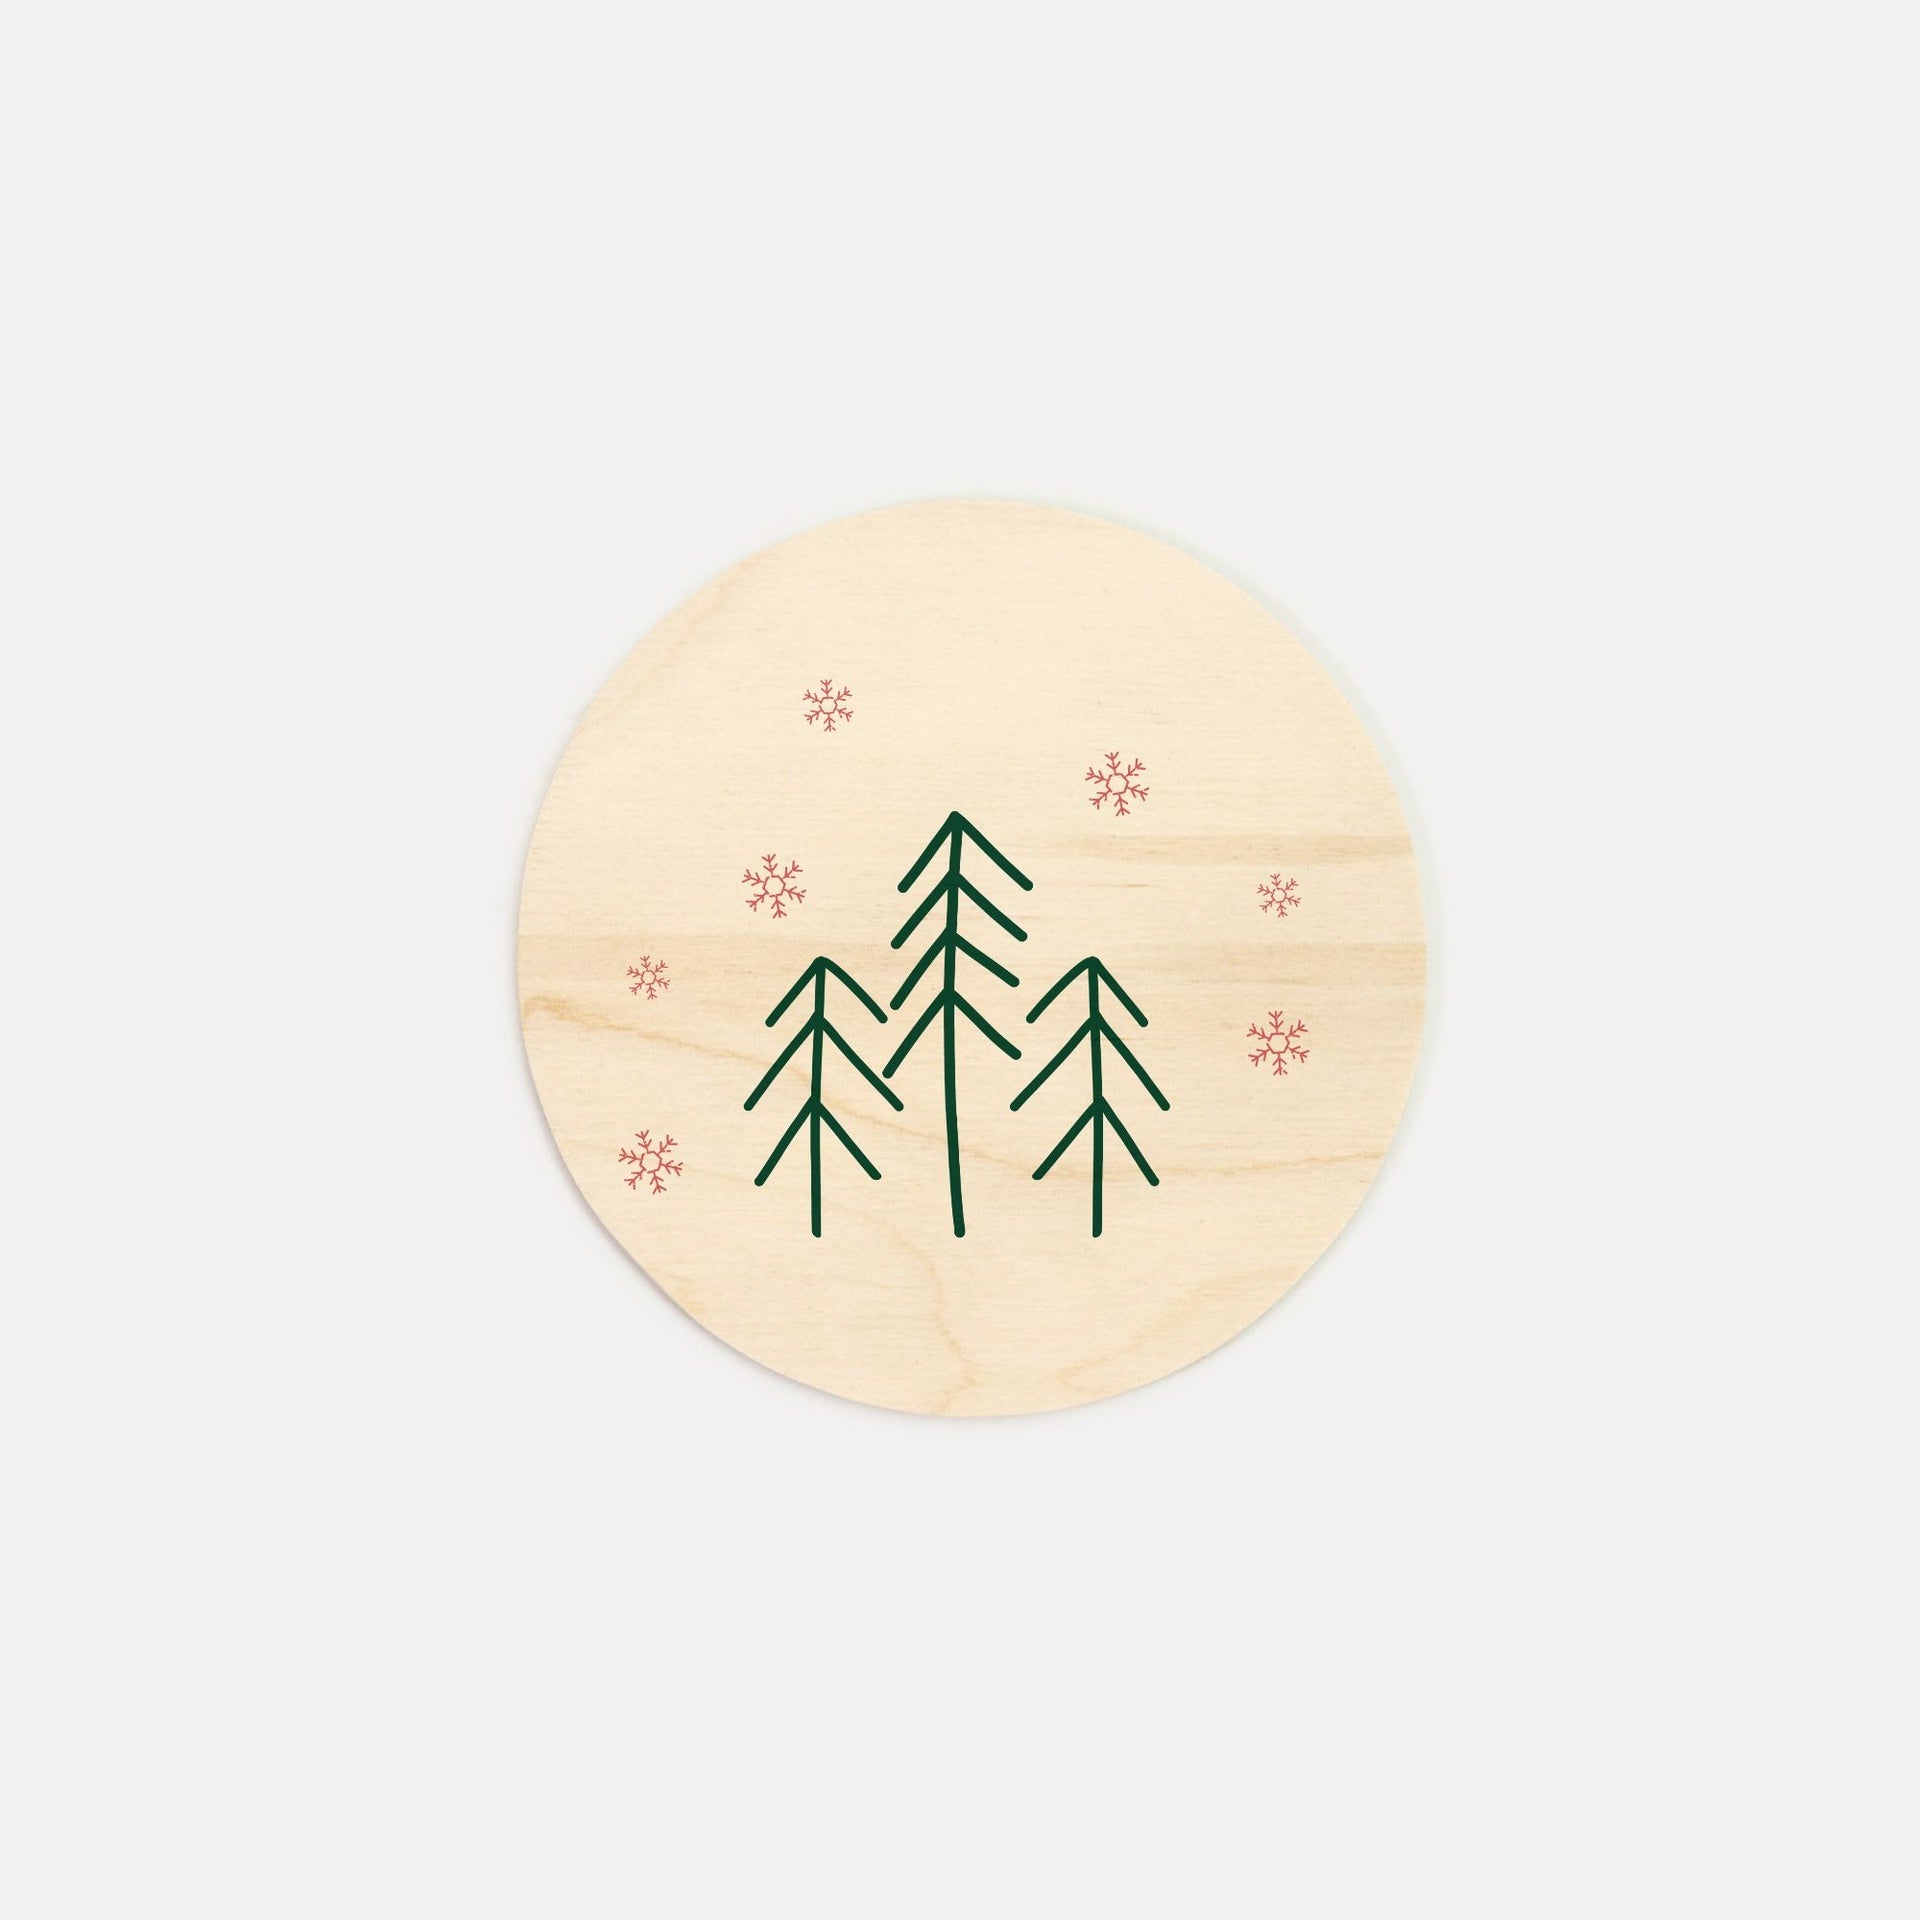 6" Round Wood Sign - Evergreens & Snowflakes